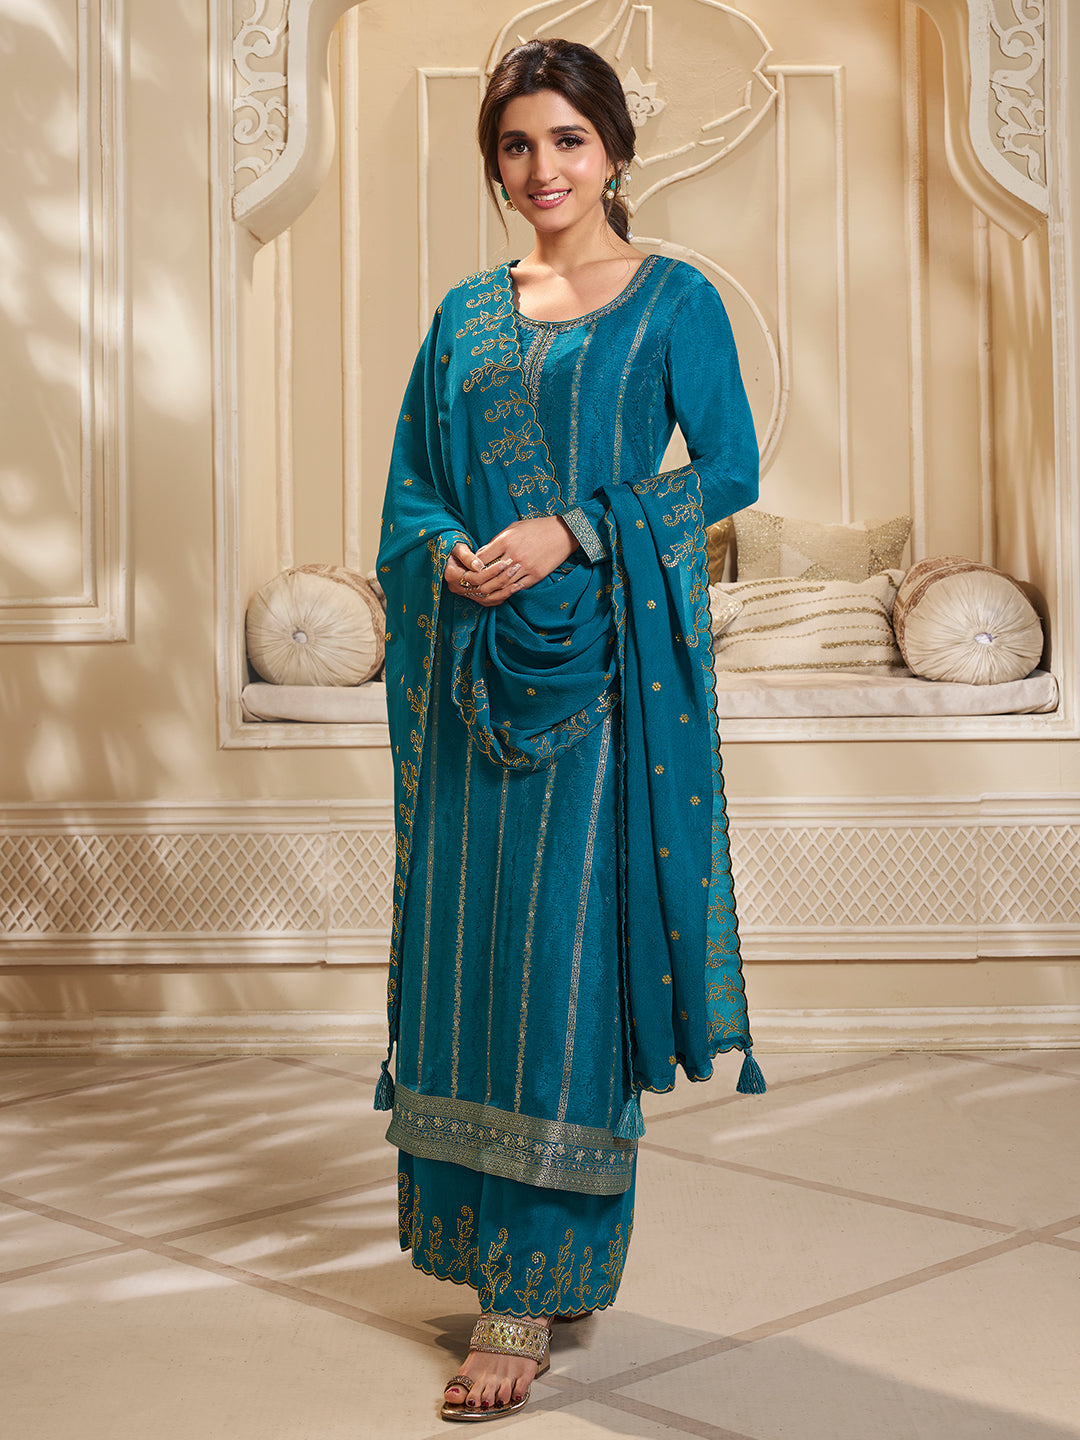 Blue Dola Silk Palazzo Suit Set with Zari and Self Weave Jacquard Top Product vendor